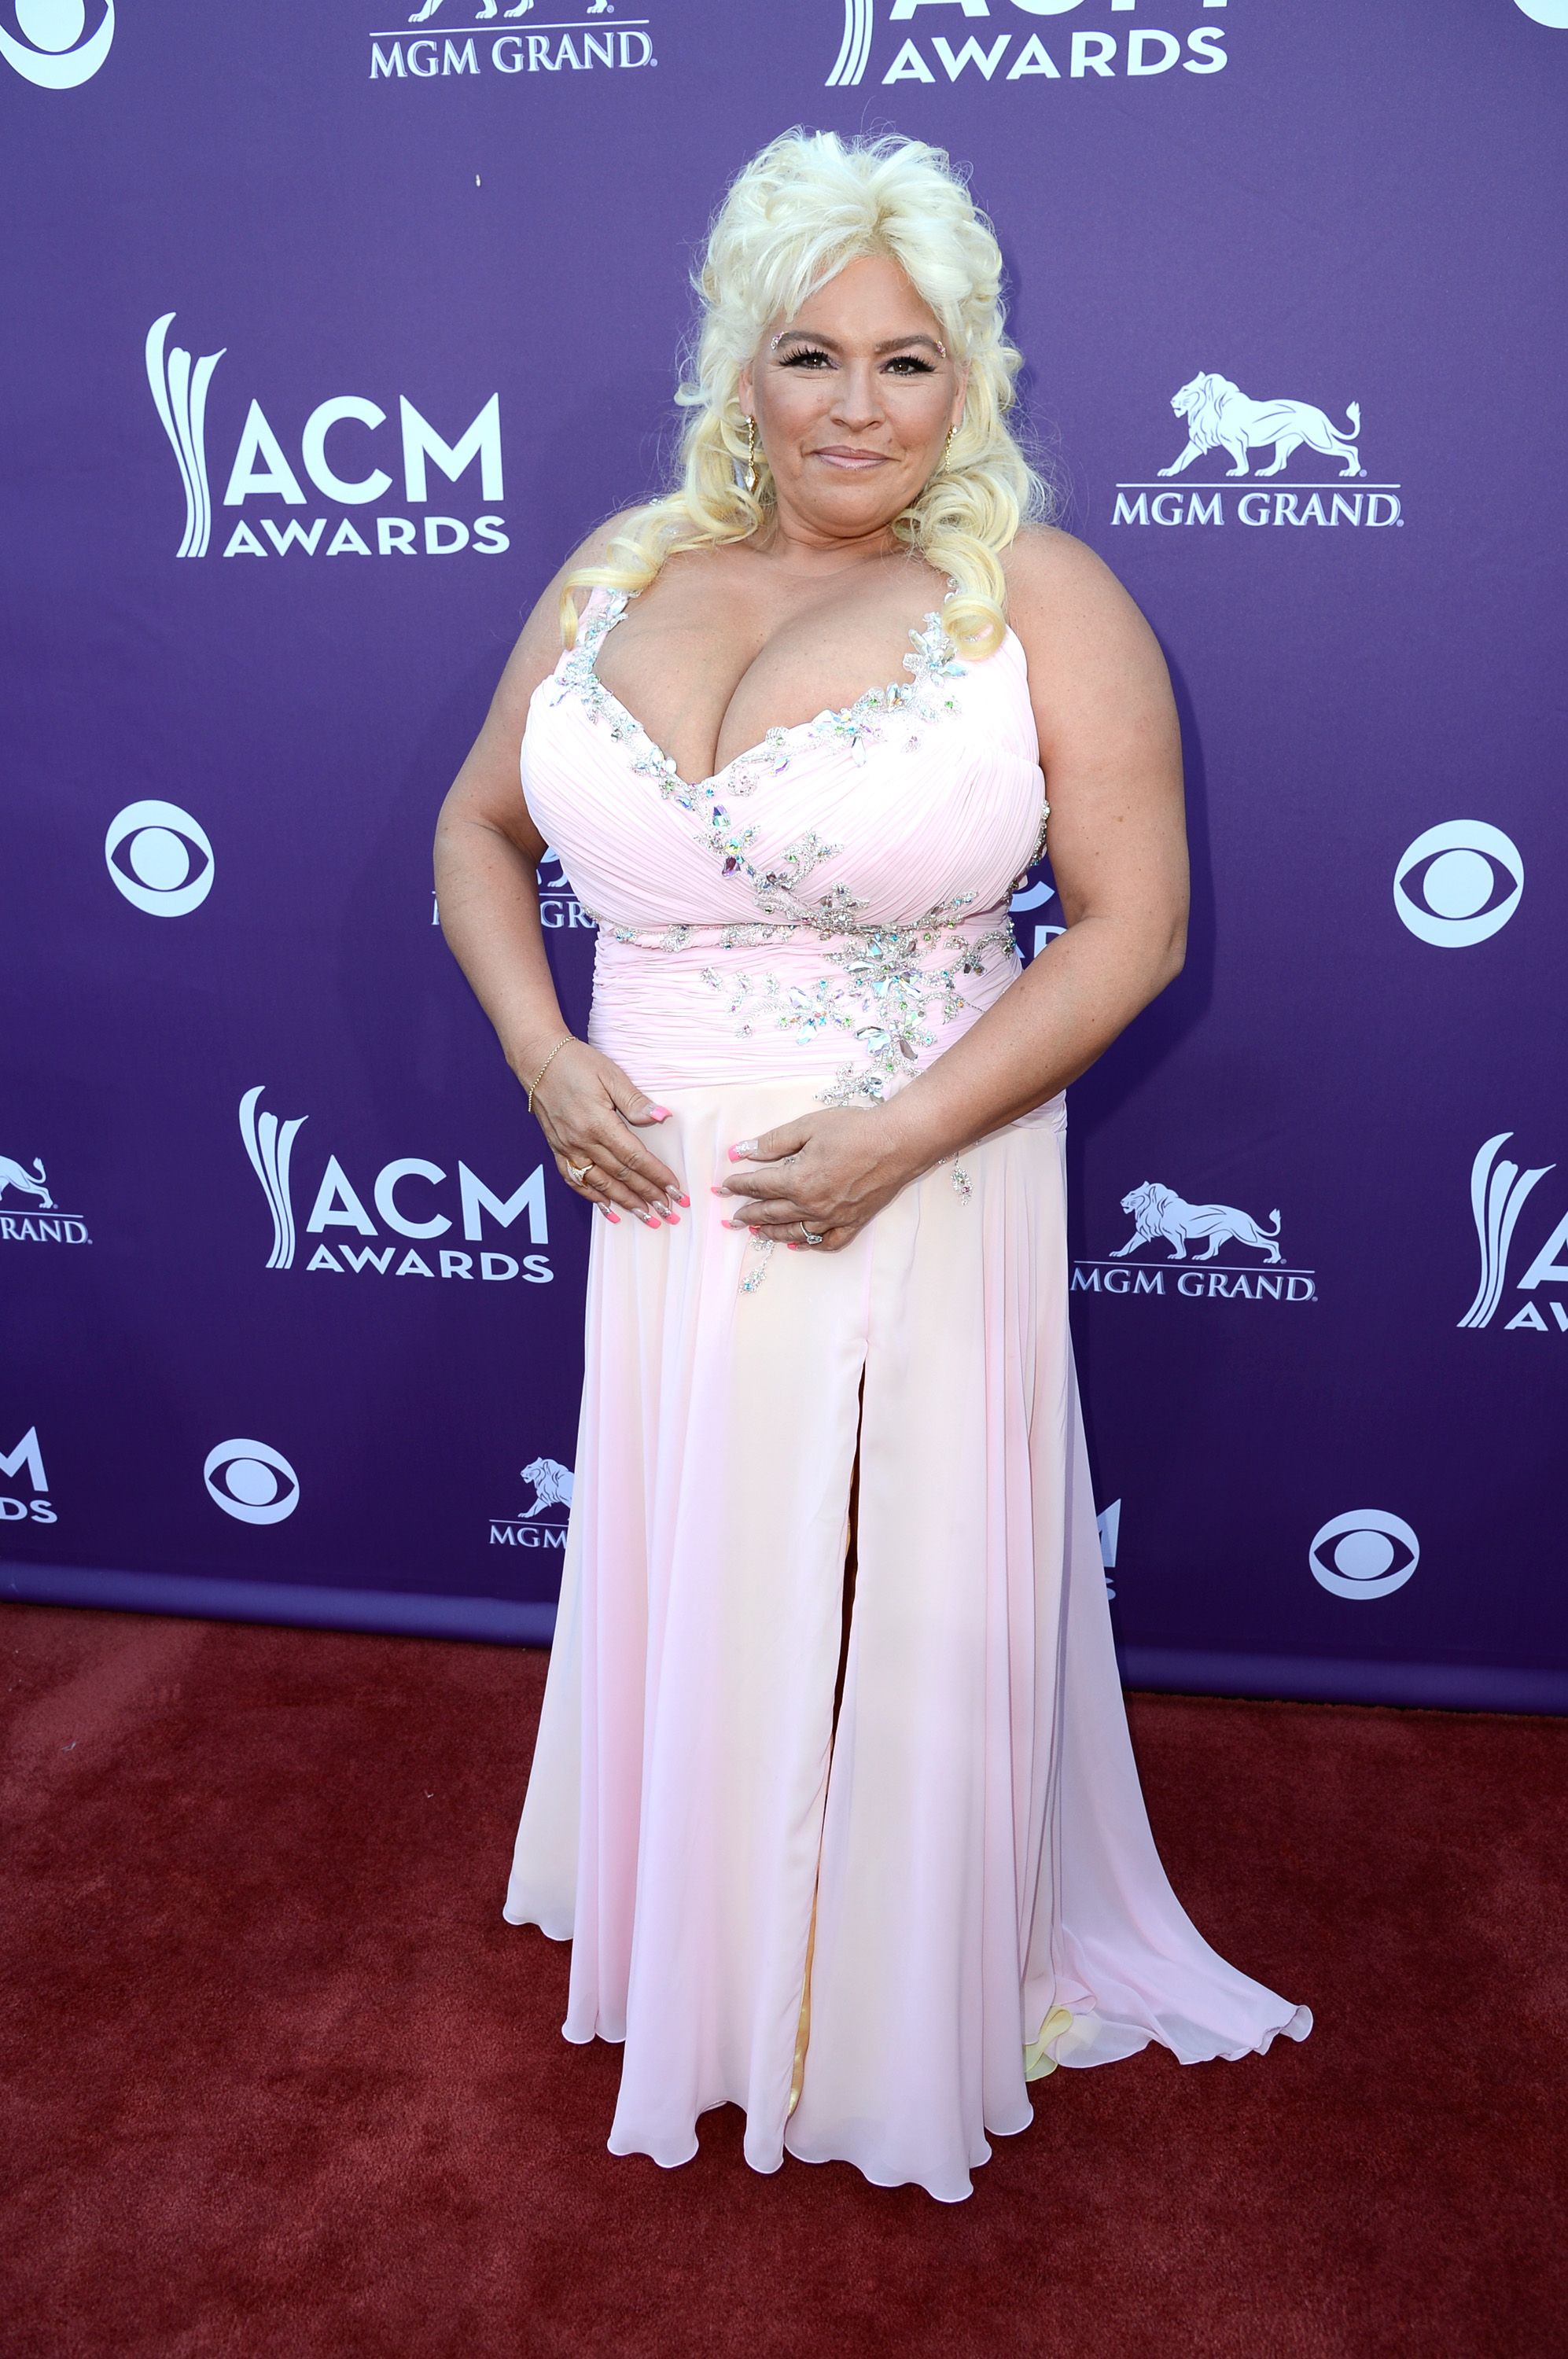 Beth Chapman at the 48th Annual Academy of Country Music Awards on April 7, 2013, in Las Vegas, Nevada | Photo: Getty Images